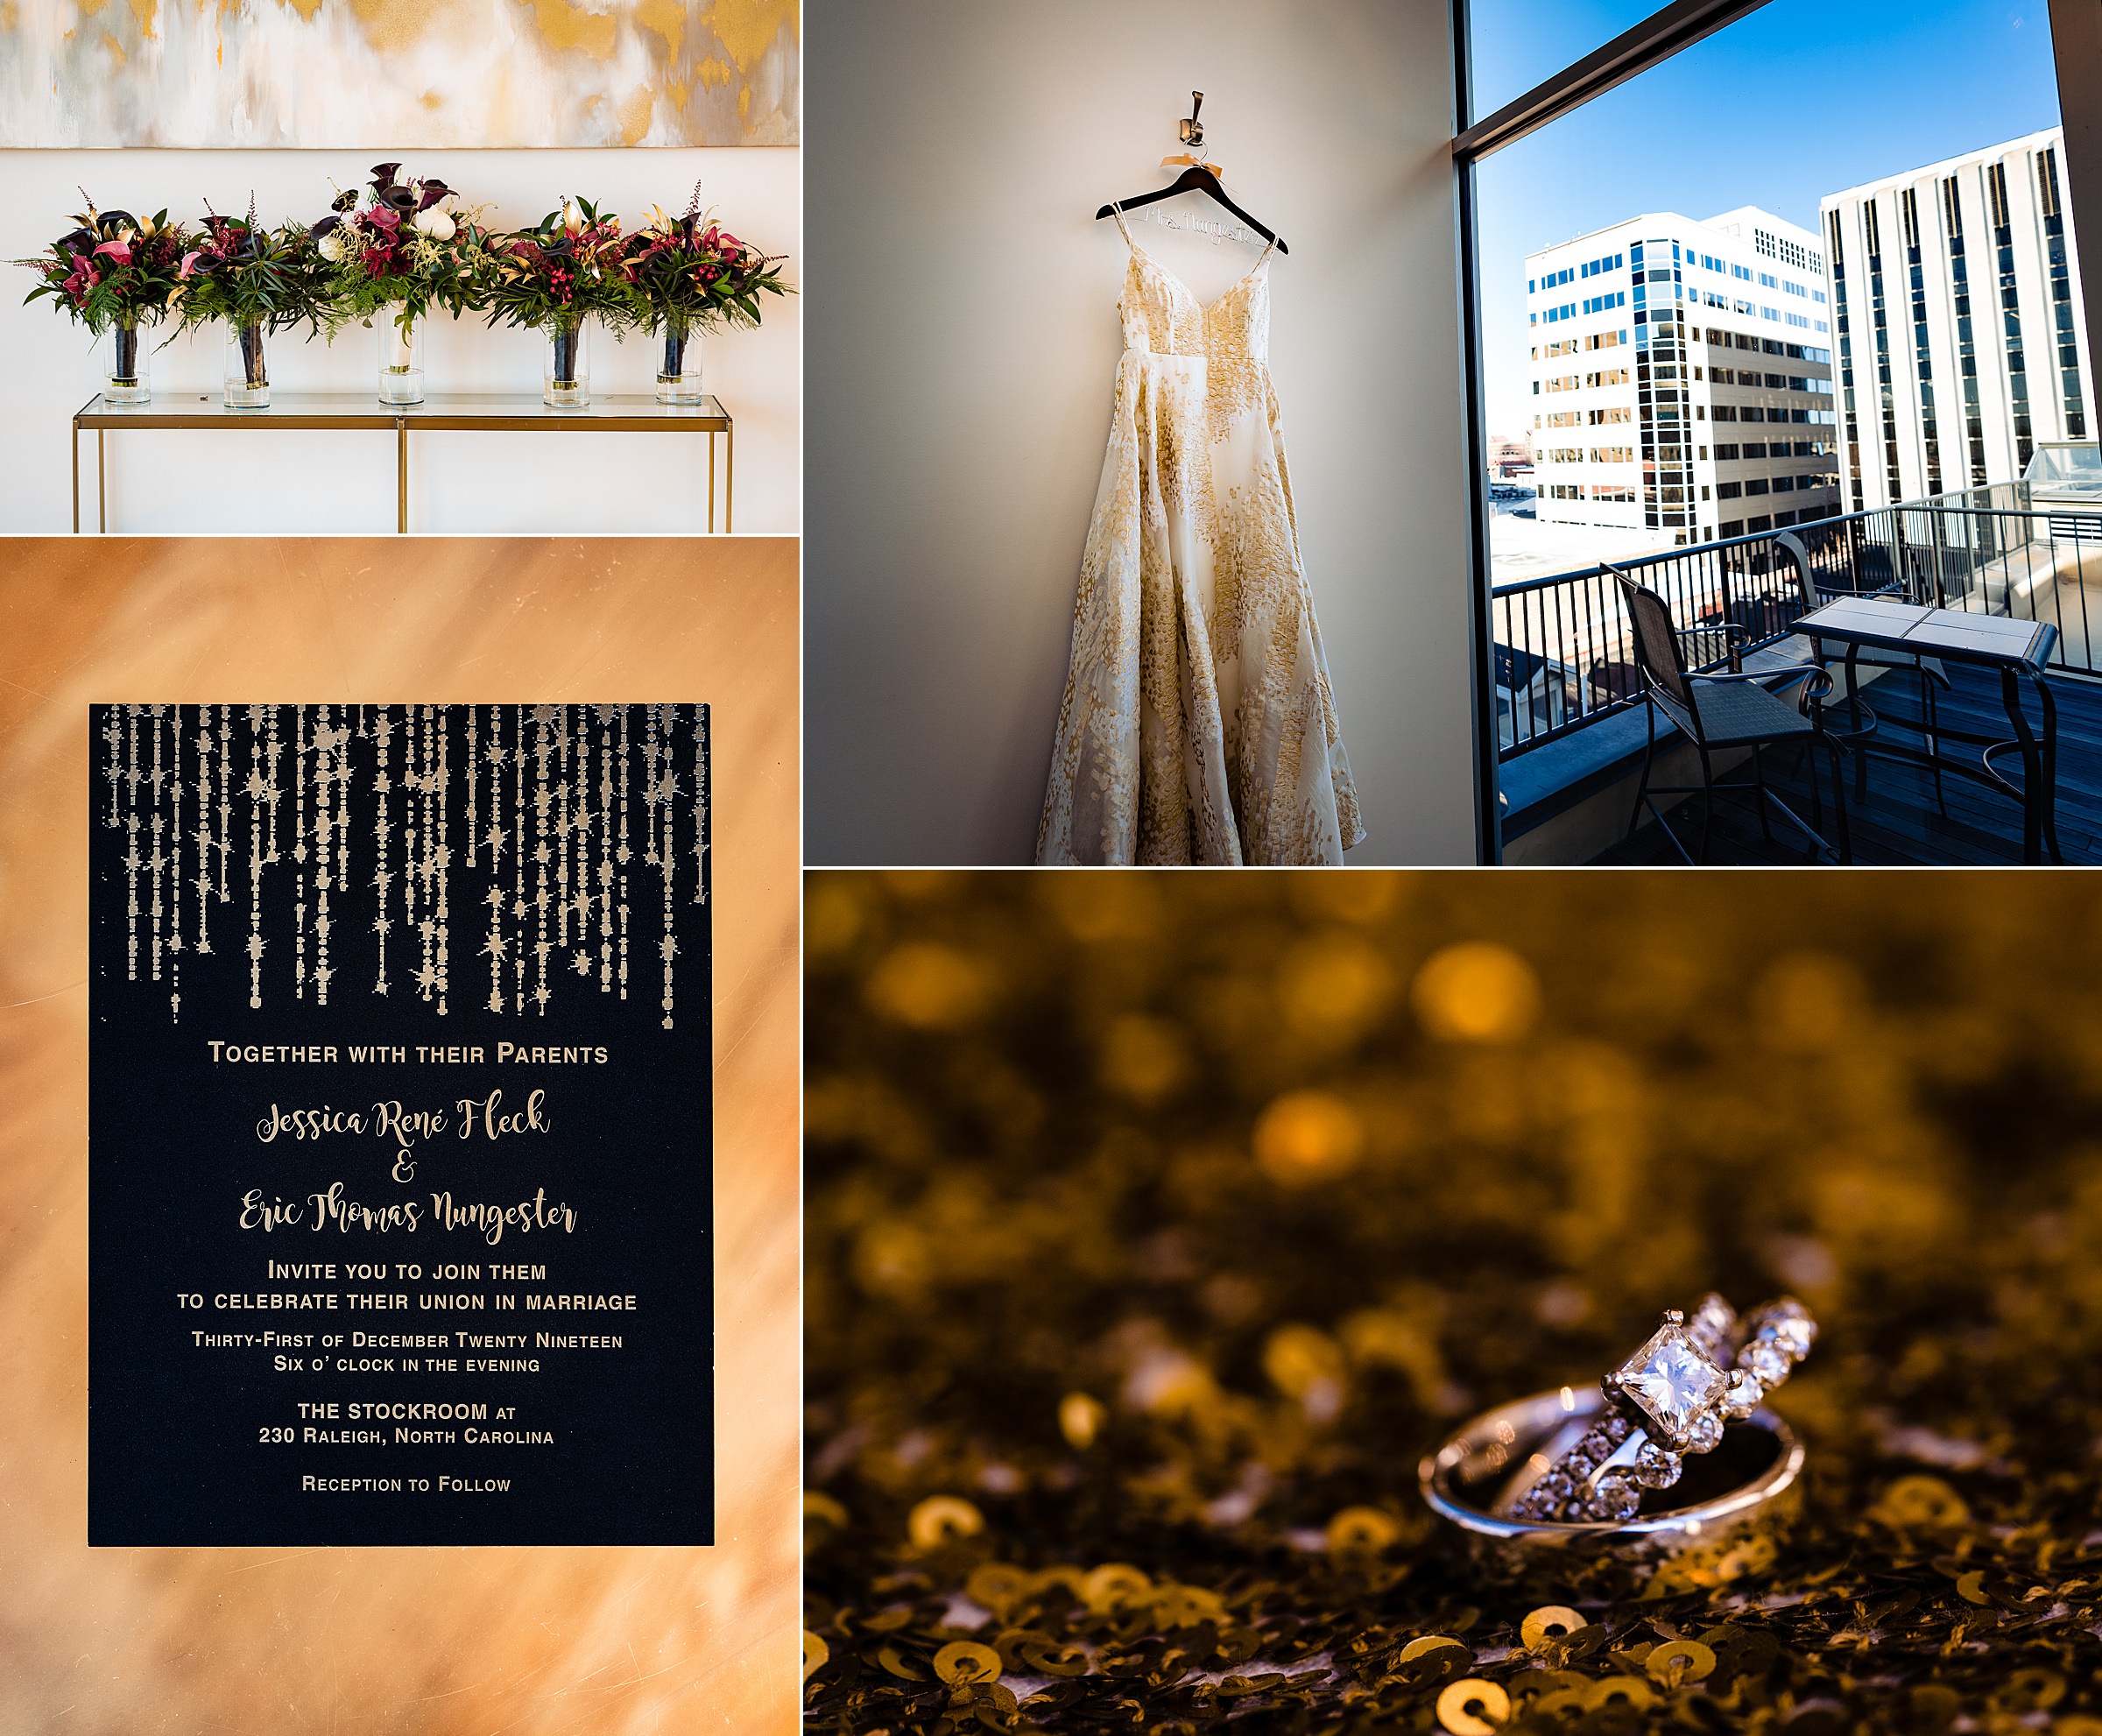 Collage of photos showing details from a New Year's wedding at the Stockroom in Raleigh, NC. Details include purple and gold bouquets, the bride's white and gold dress, a black and gold invitation, and the couple's wedding rings | kivusandcamera.com